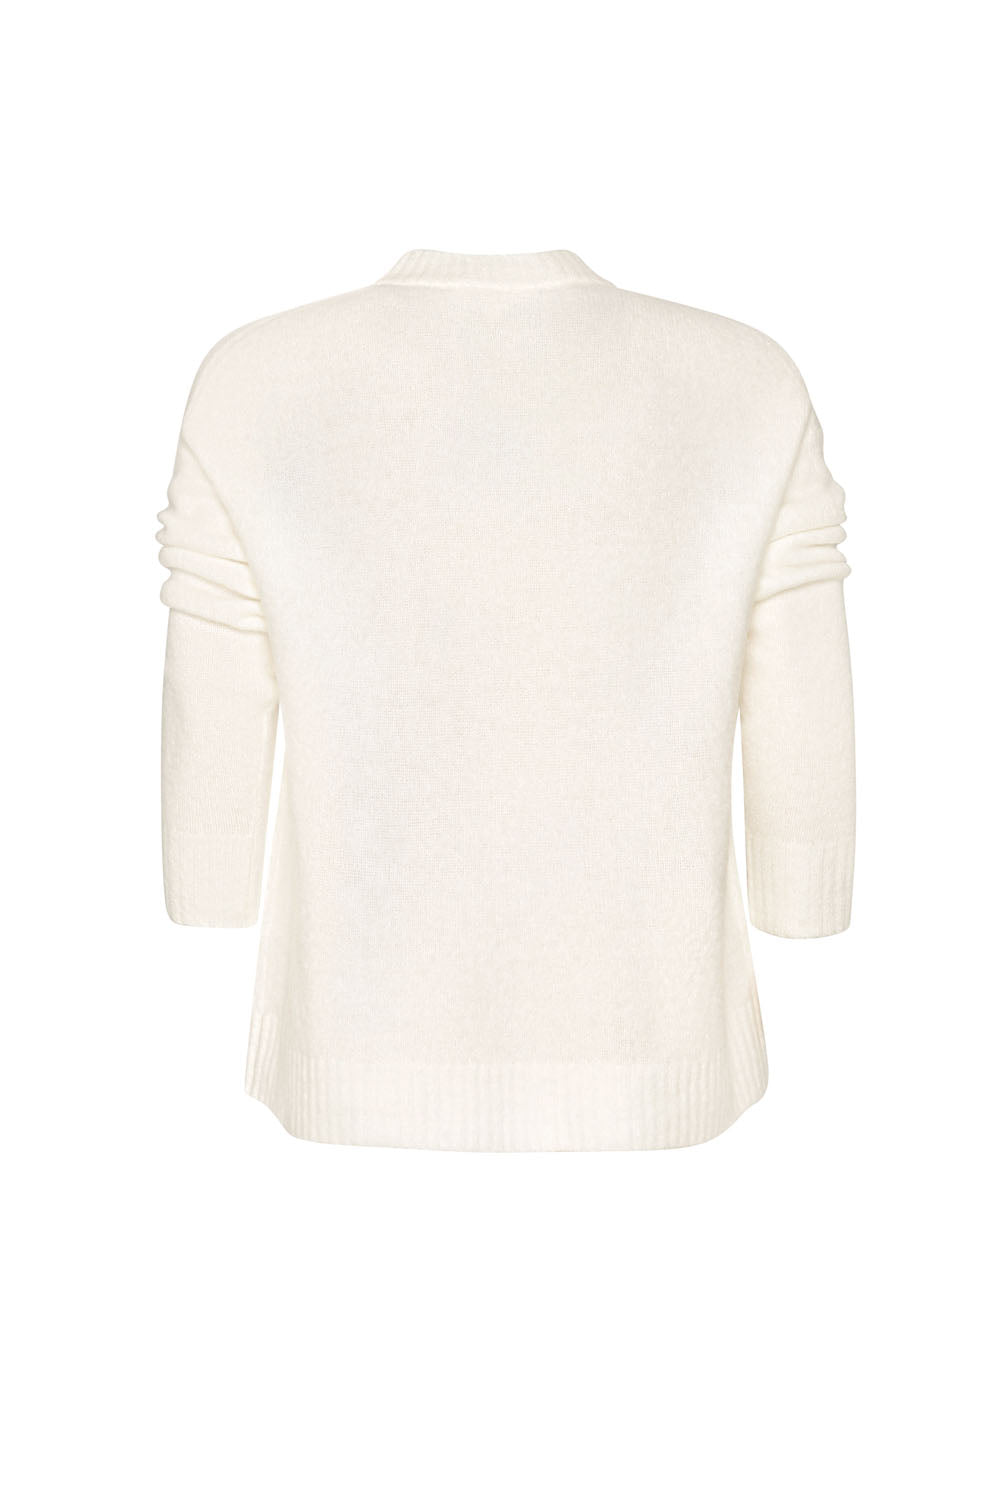 MADLY SWEETLY DOWNY-JR CARDI - WINTER WHITE - THE VOGUE STORE